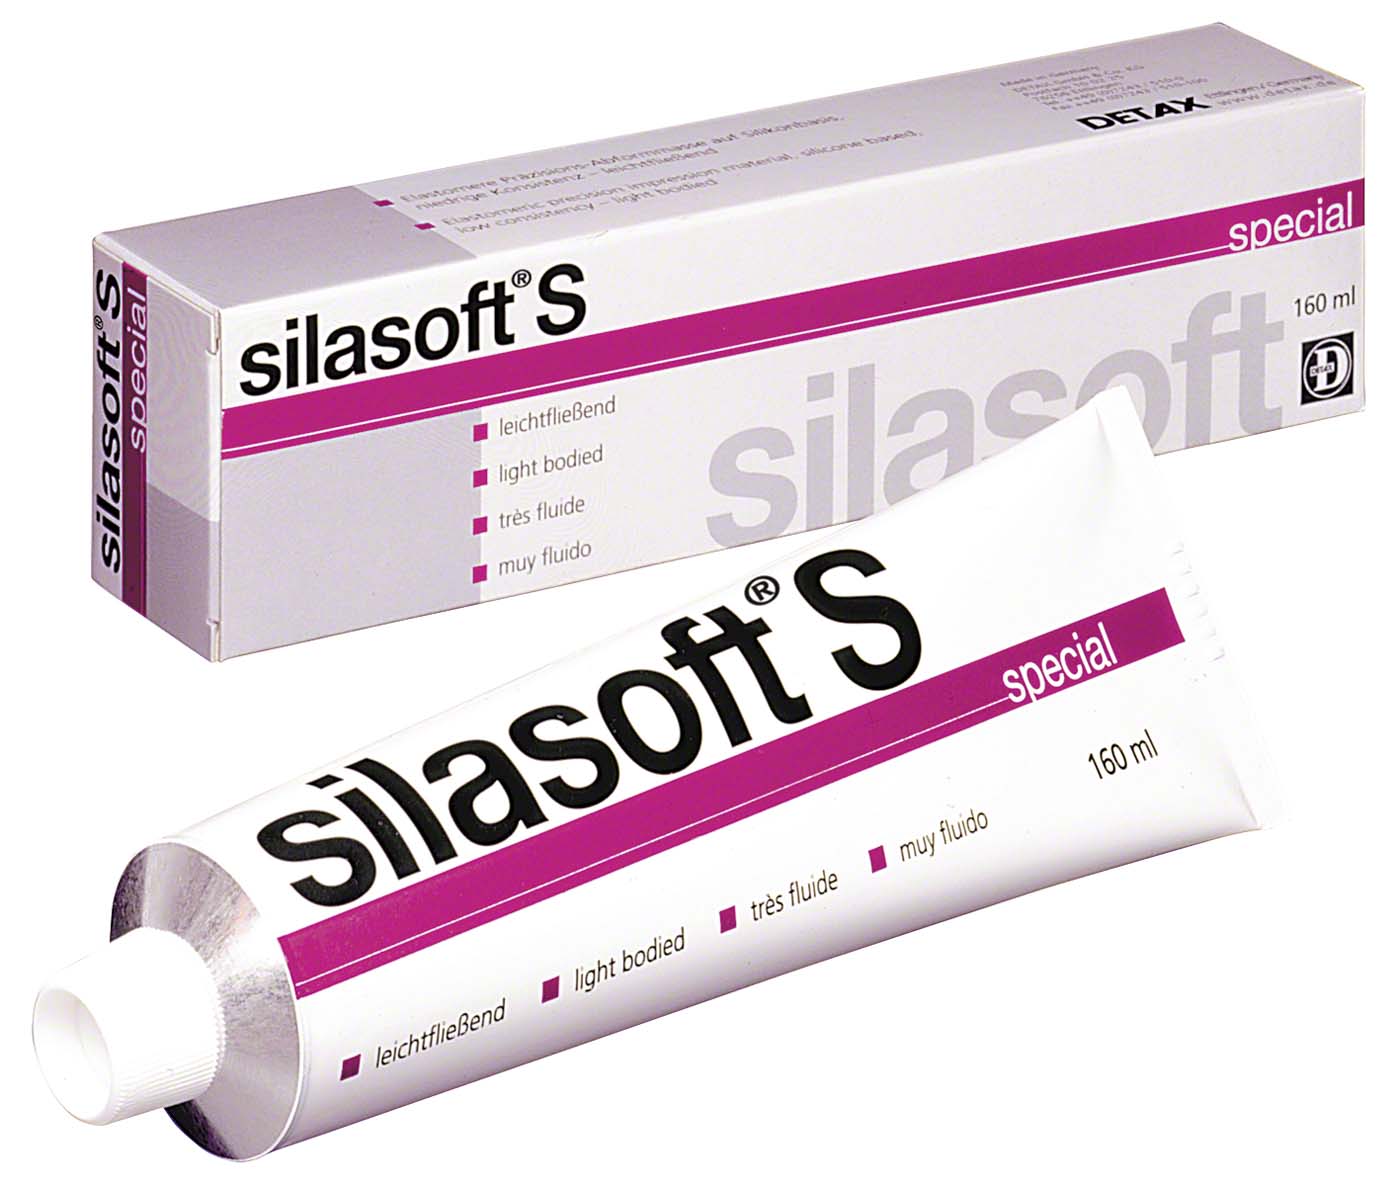 silasoft® S special DETAX